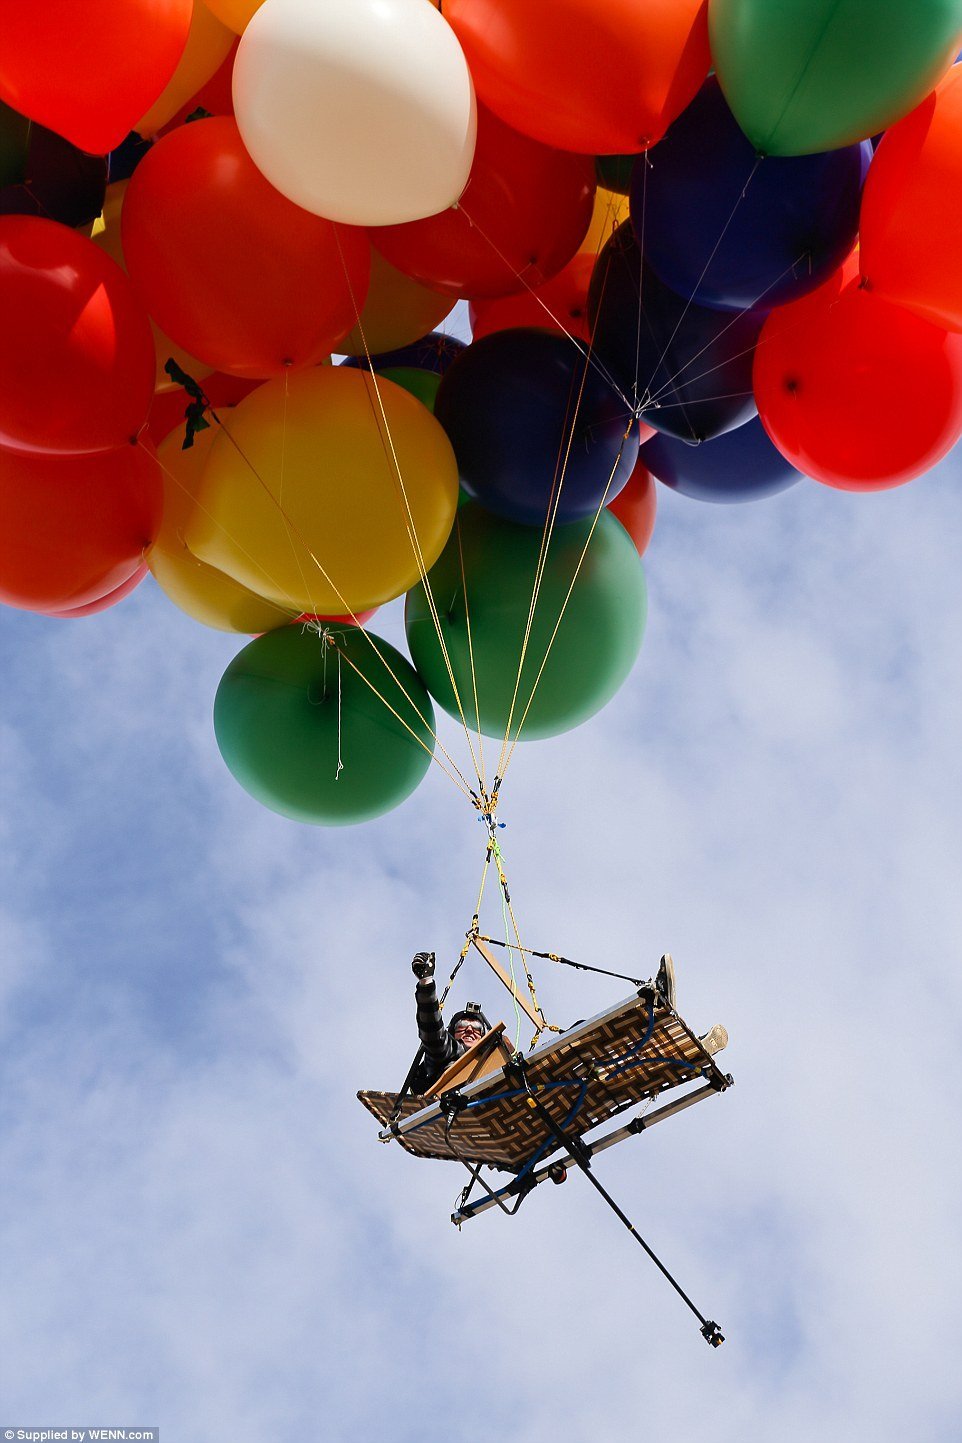 Man Floats At An Elevation of 8000 Feet With 90 Tied Balloons